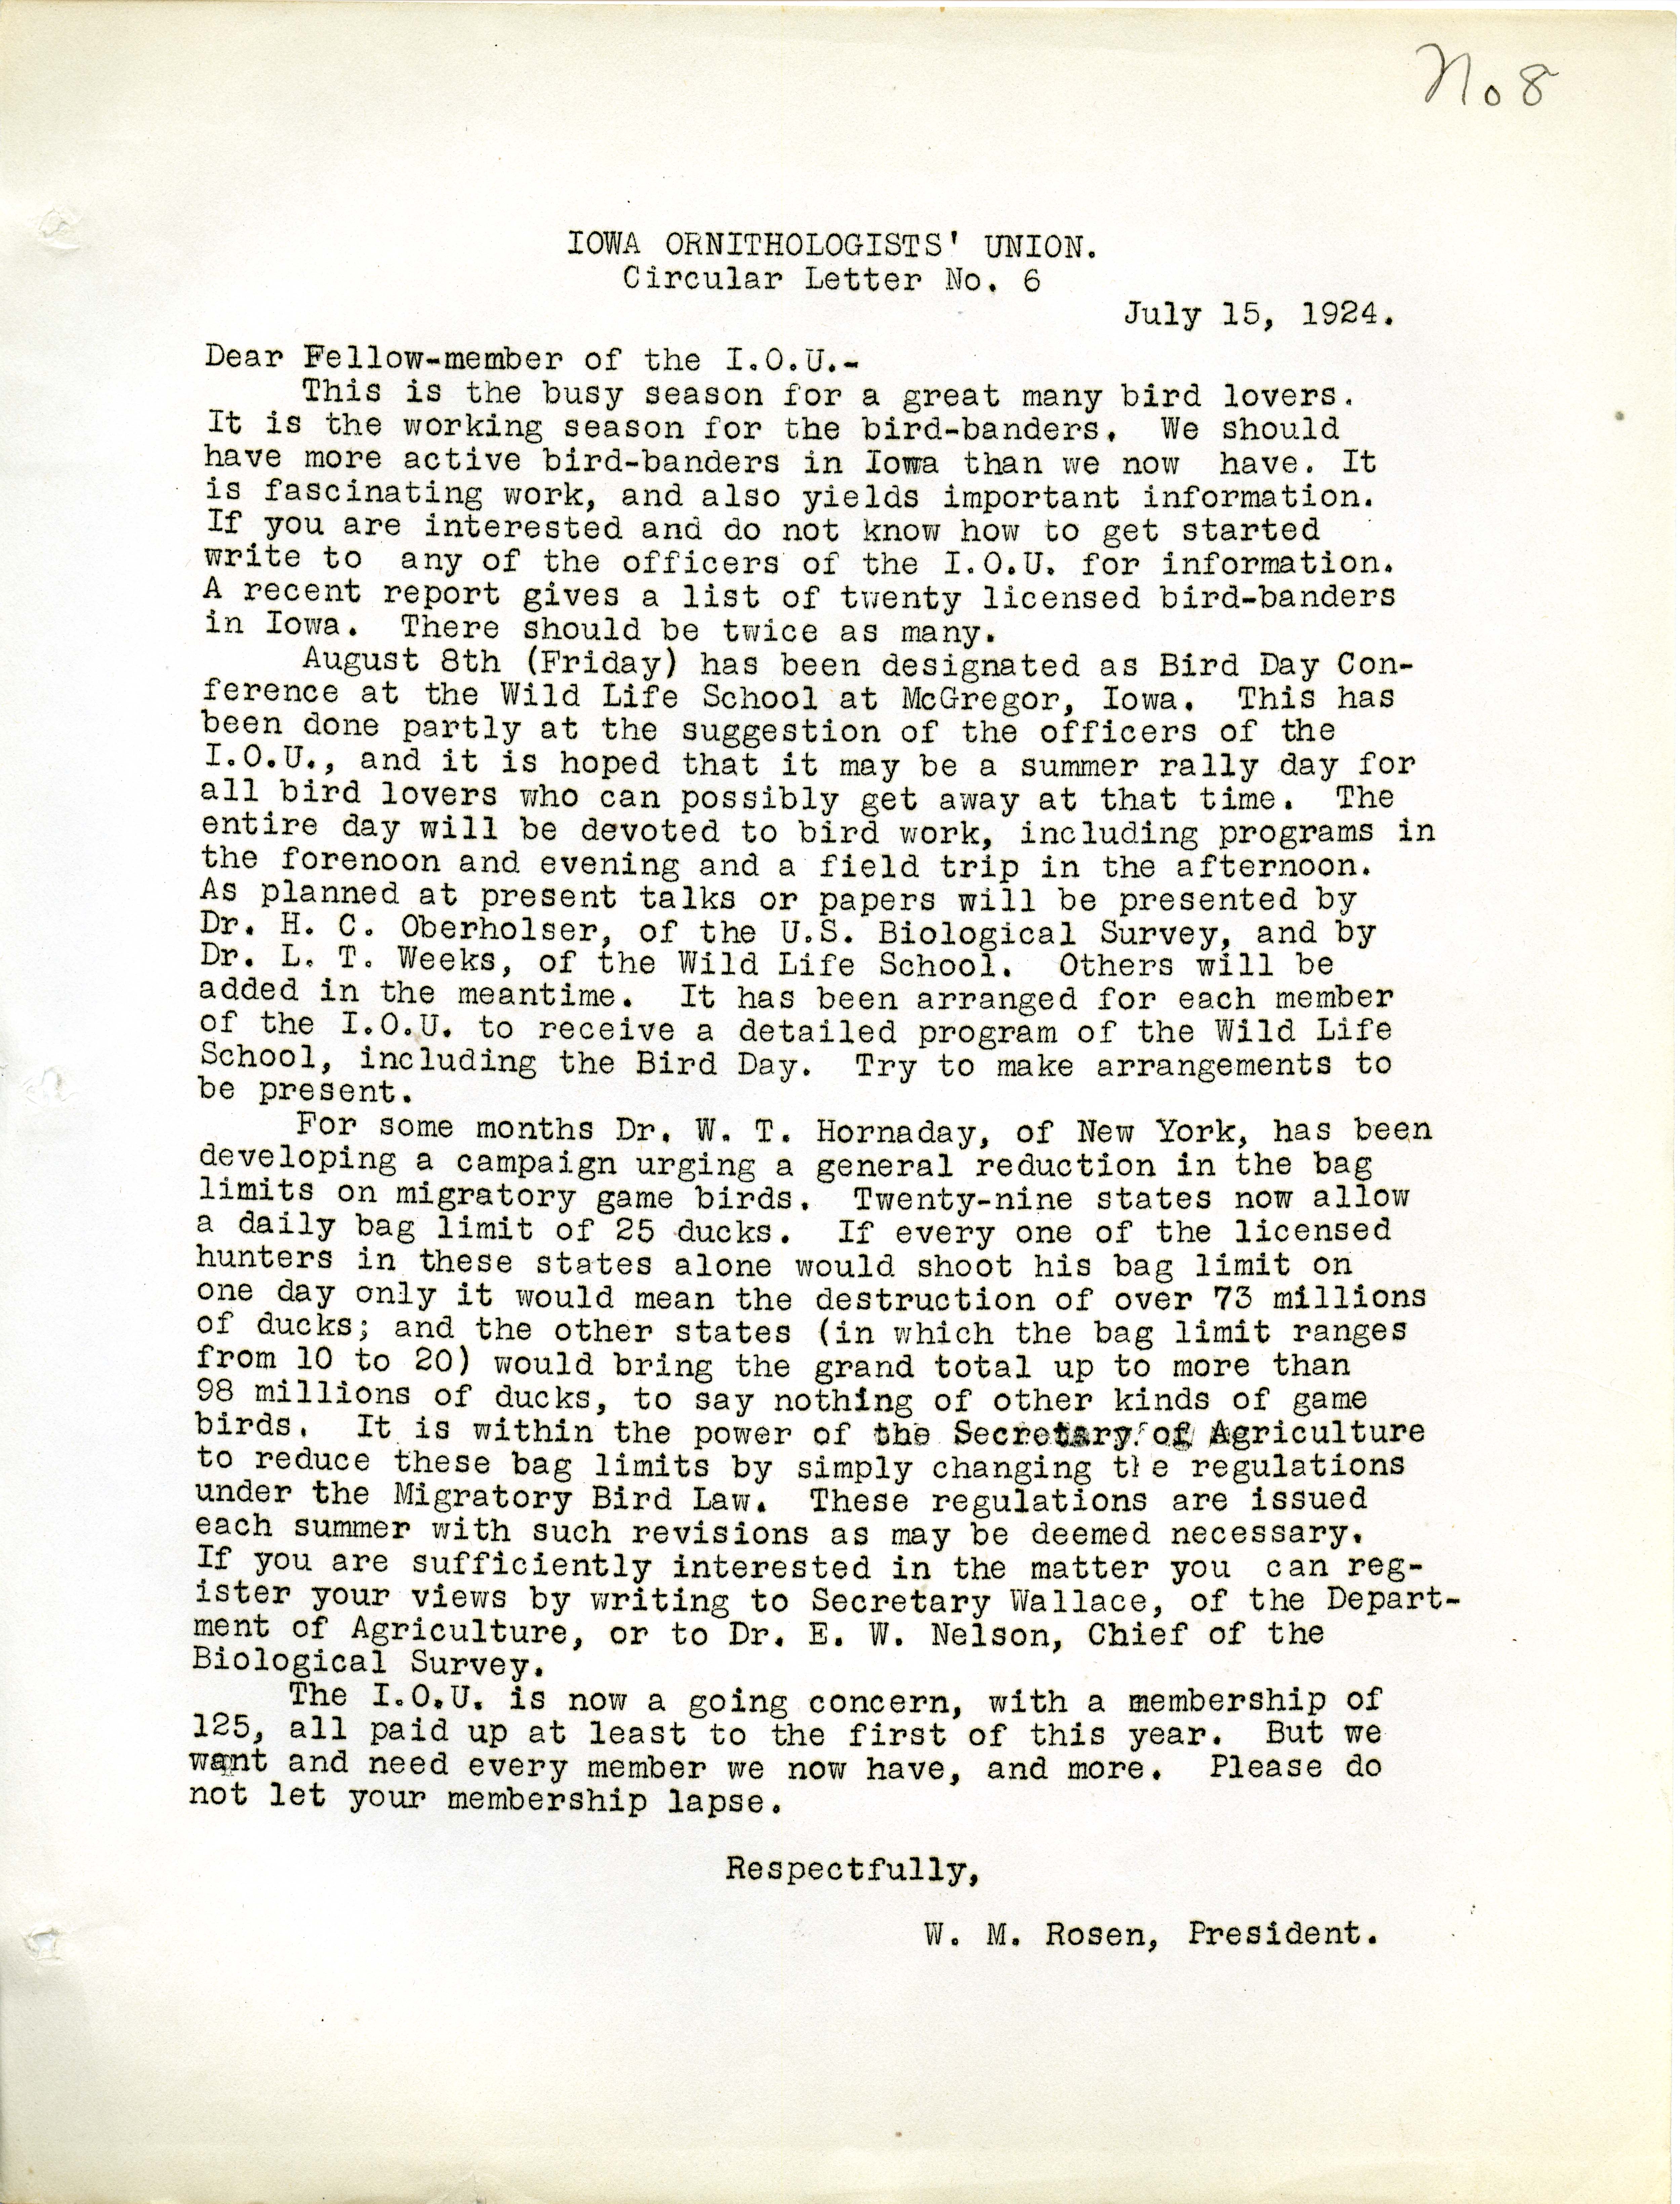 Letter to members of the Iowa Ornithologists' Union regarding upcoming activities for bird lovers, July 15, 1924